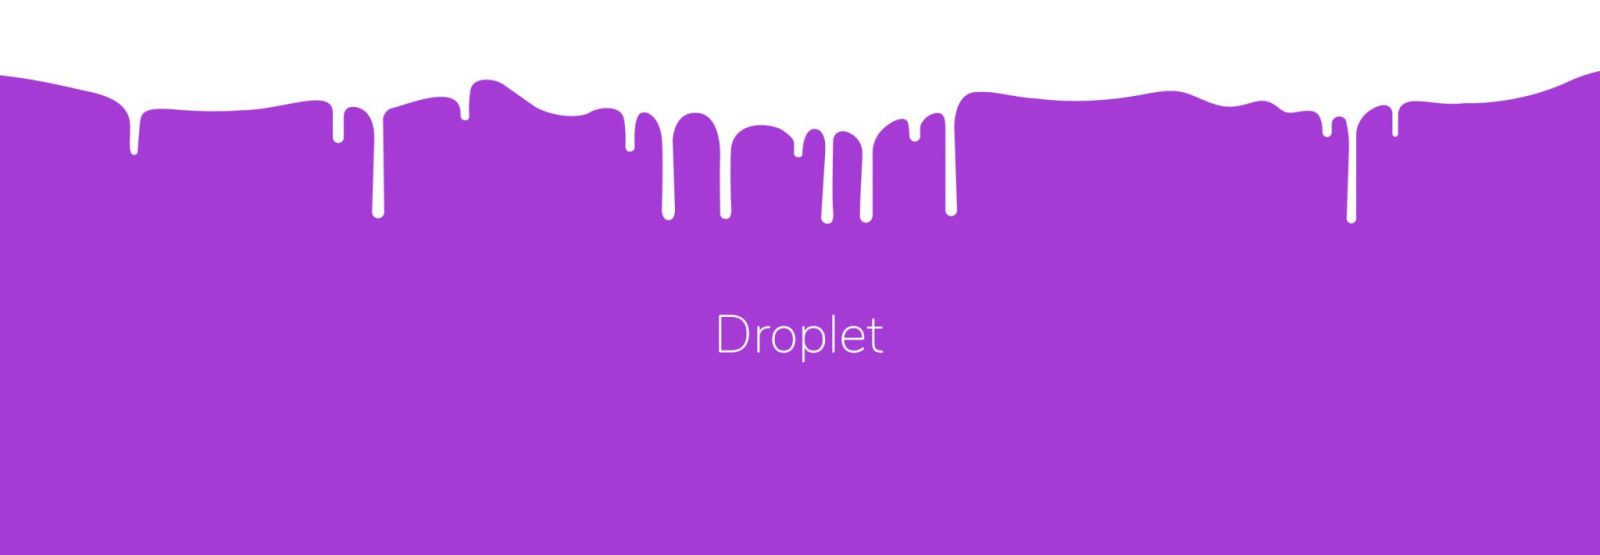 droplet1 scaled